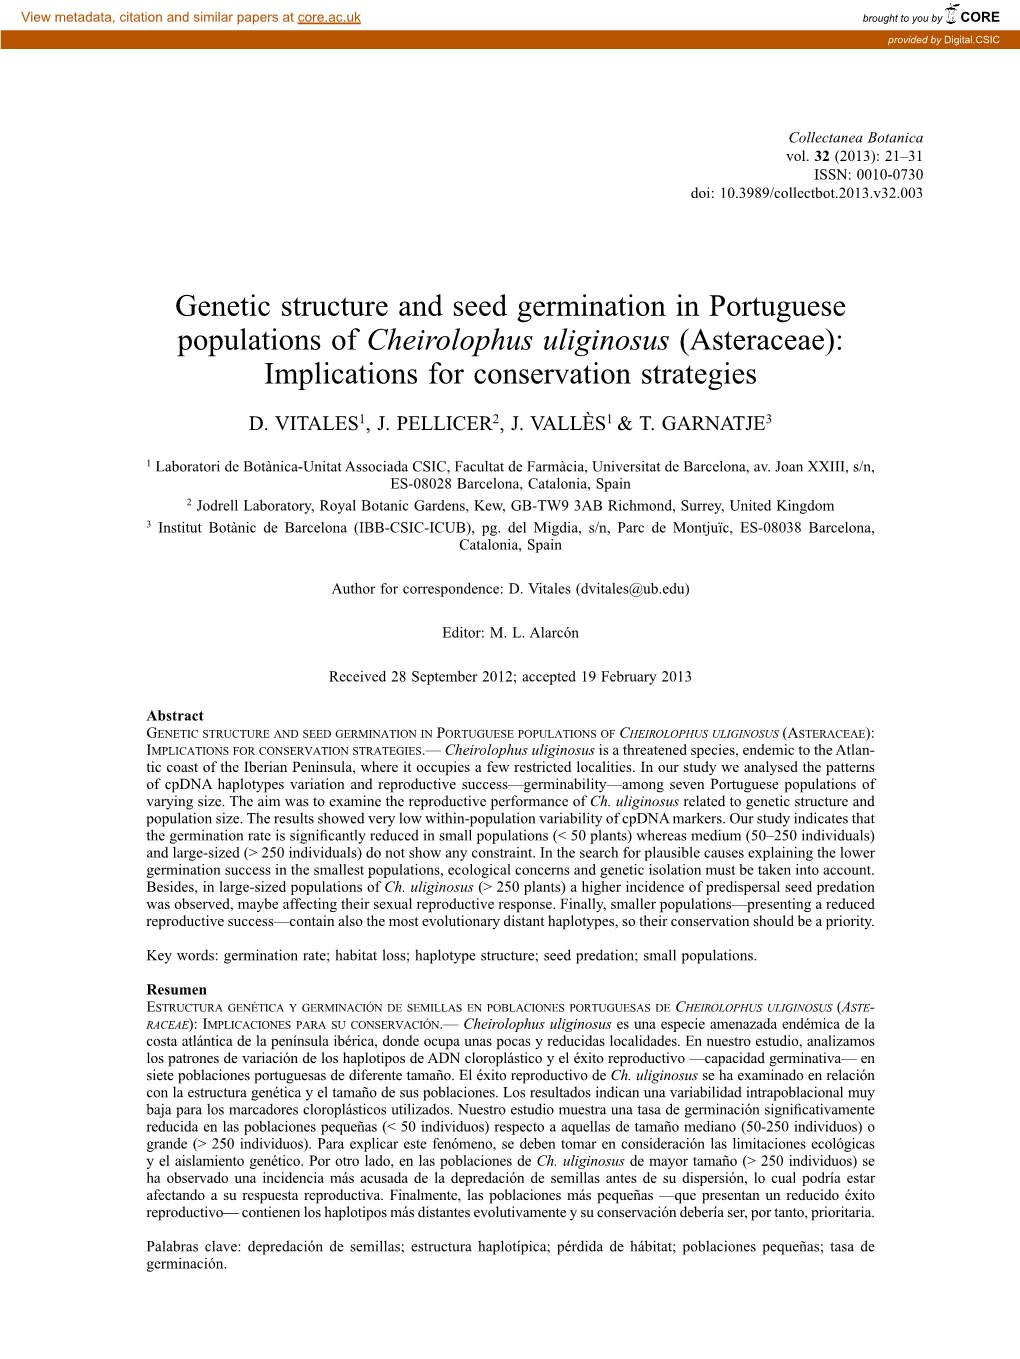 Genetic Structure and Seed Germination in Portuguese Populations of Cheirolophus Uliginosus (Asteraceae): Implications for Conservation Strategies